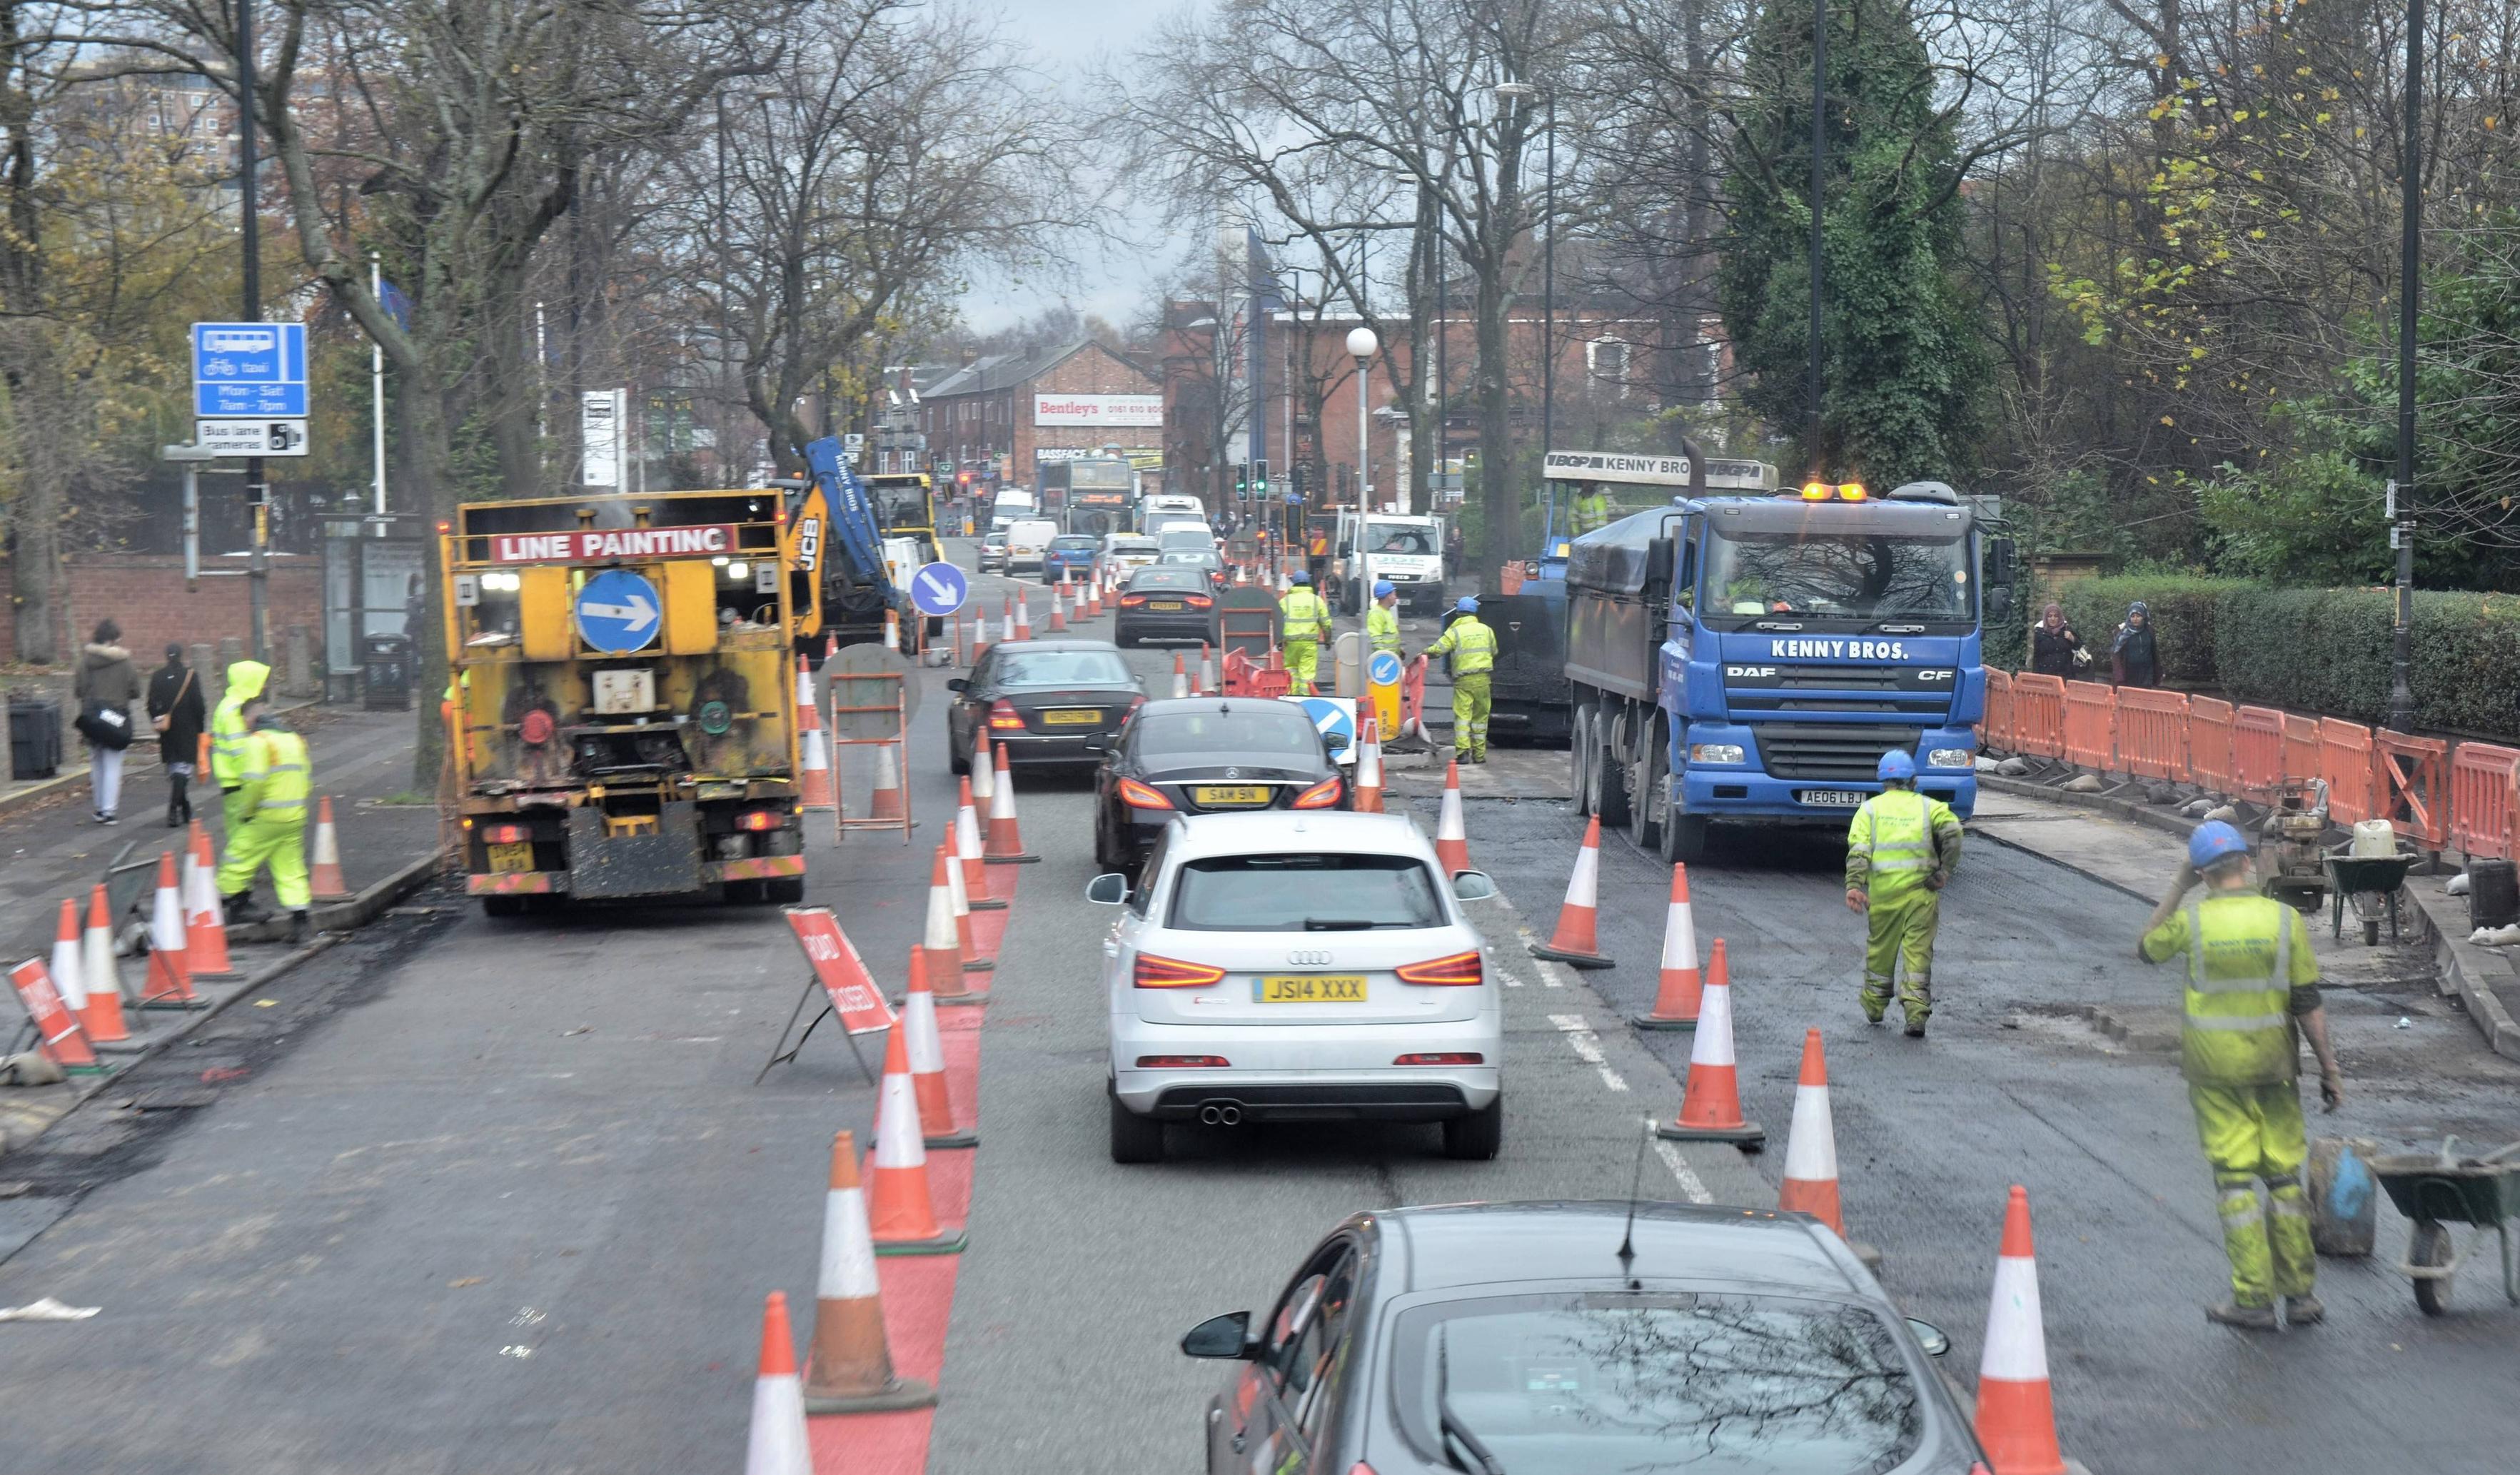 Roadworks on Wilmslow Rd, Manchester : britpics